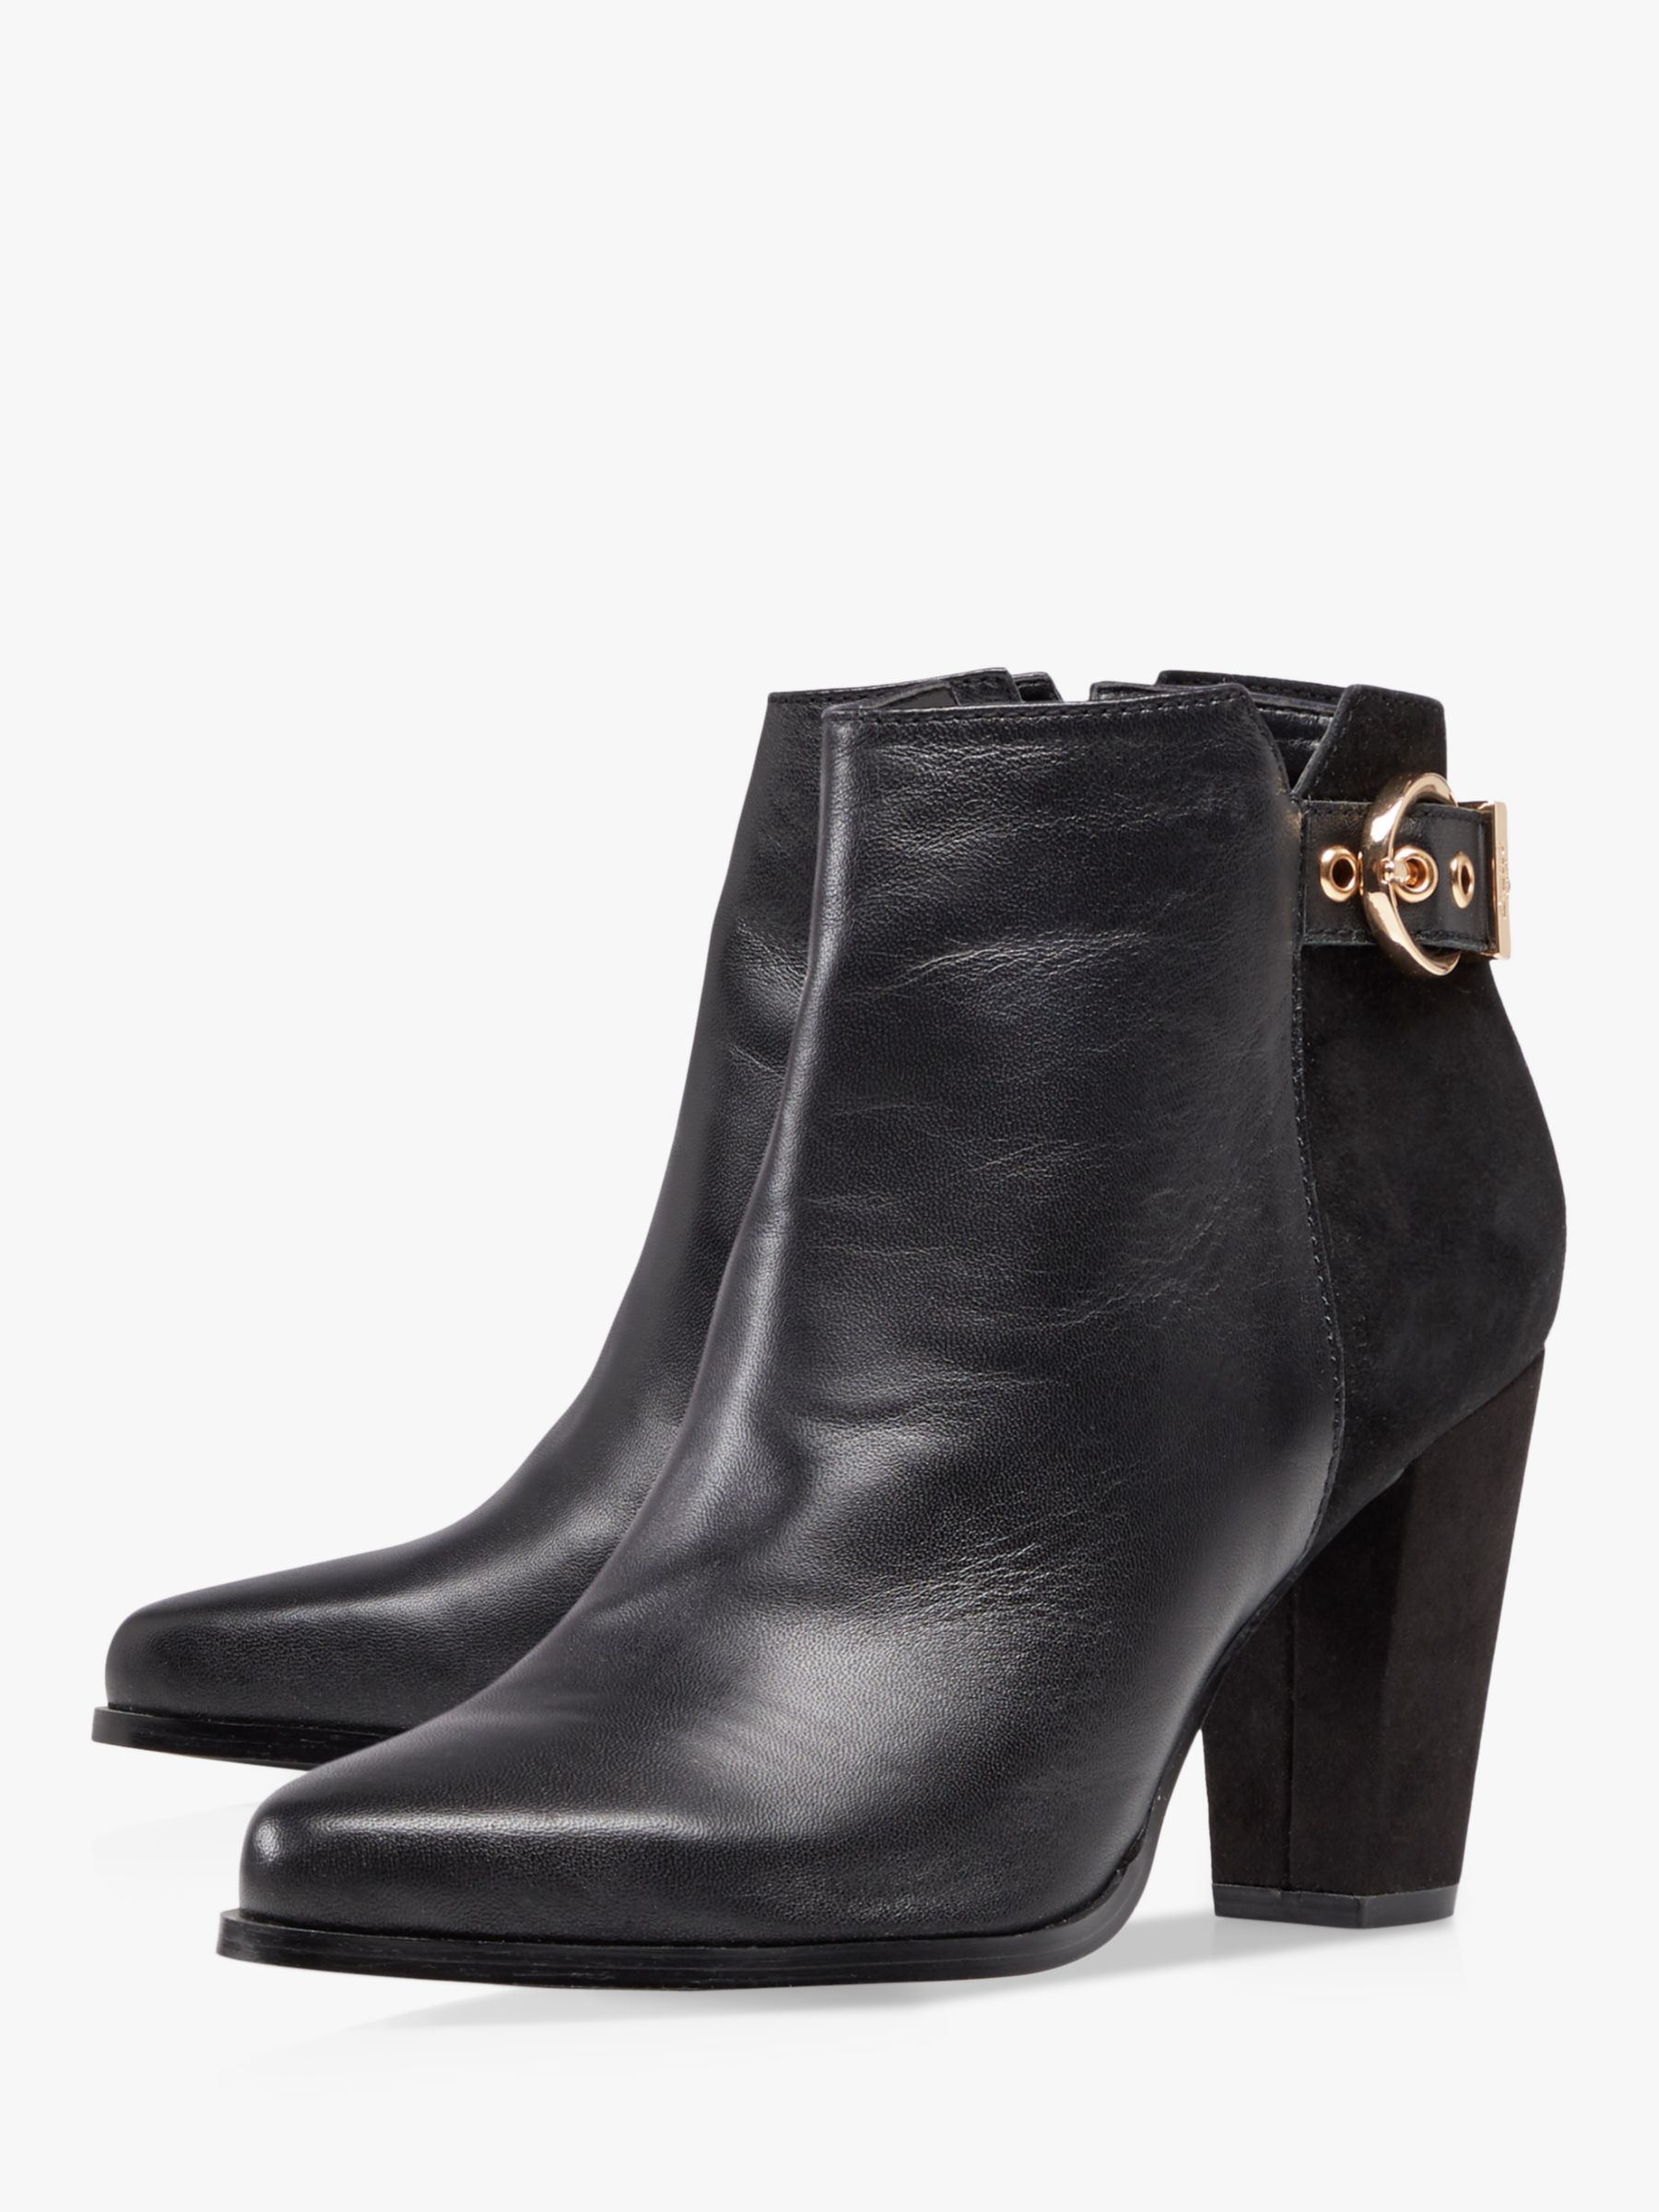 Dune Olla Leather Ankle Boots, Black